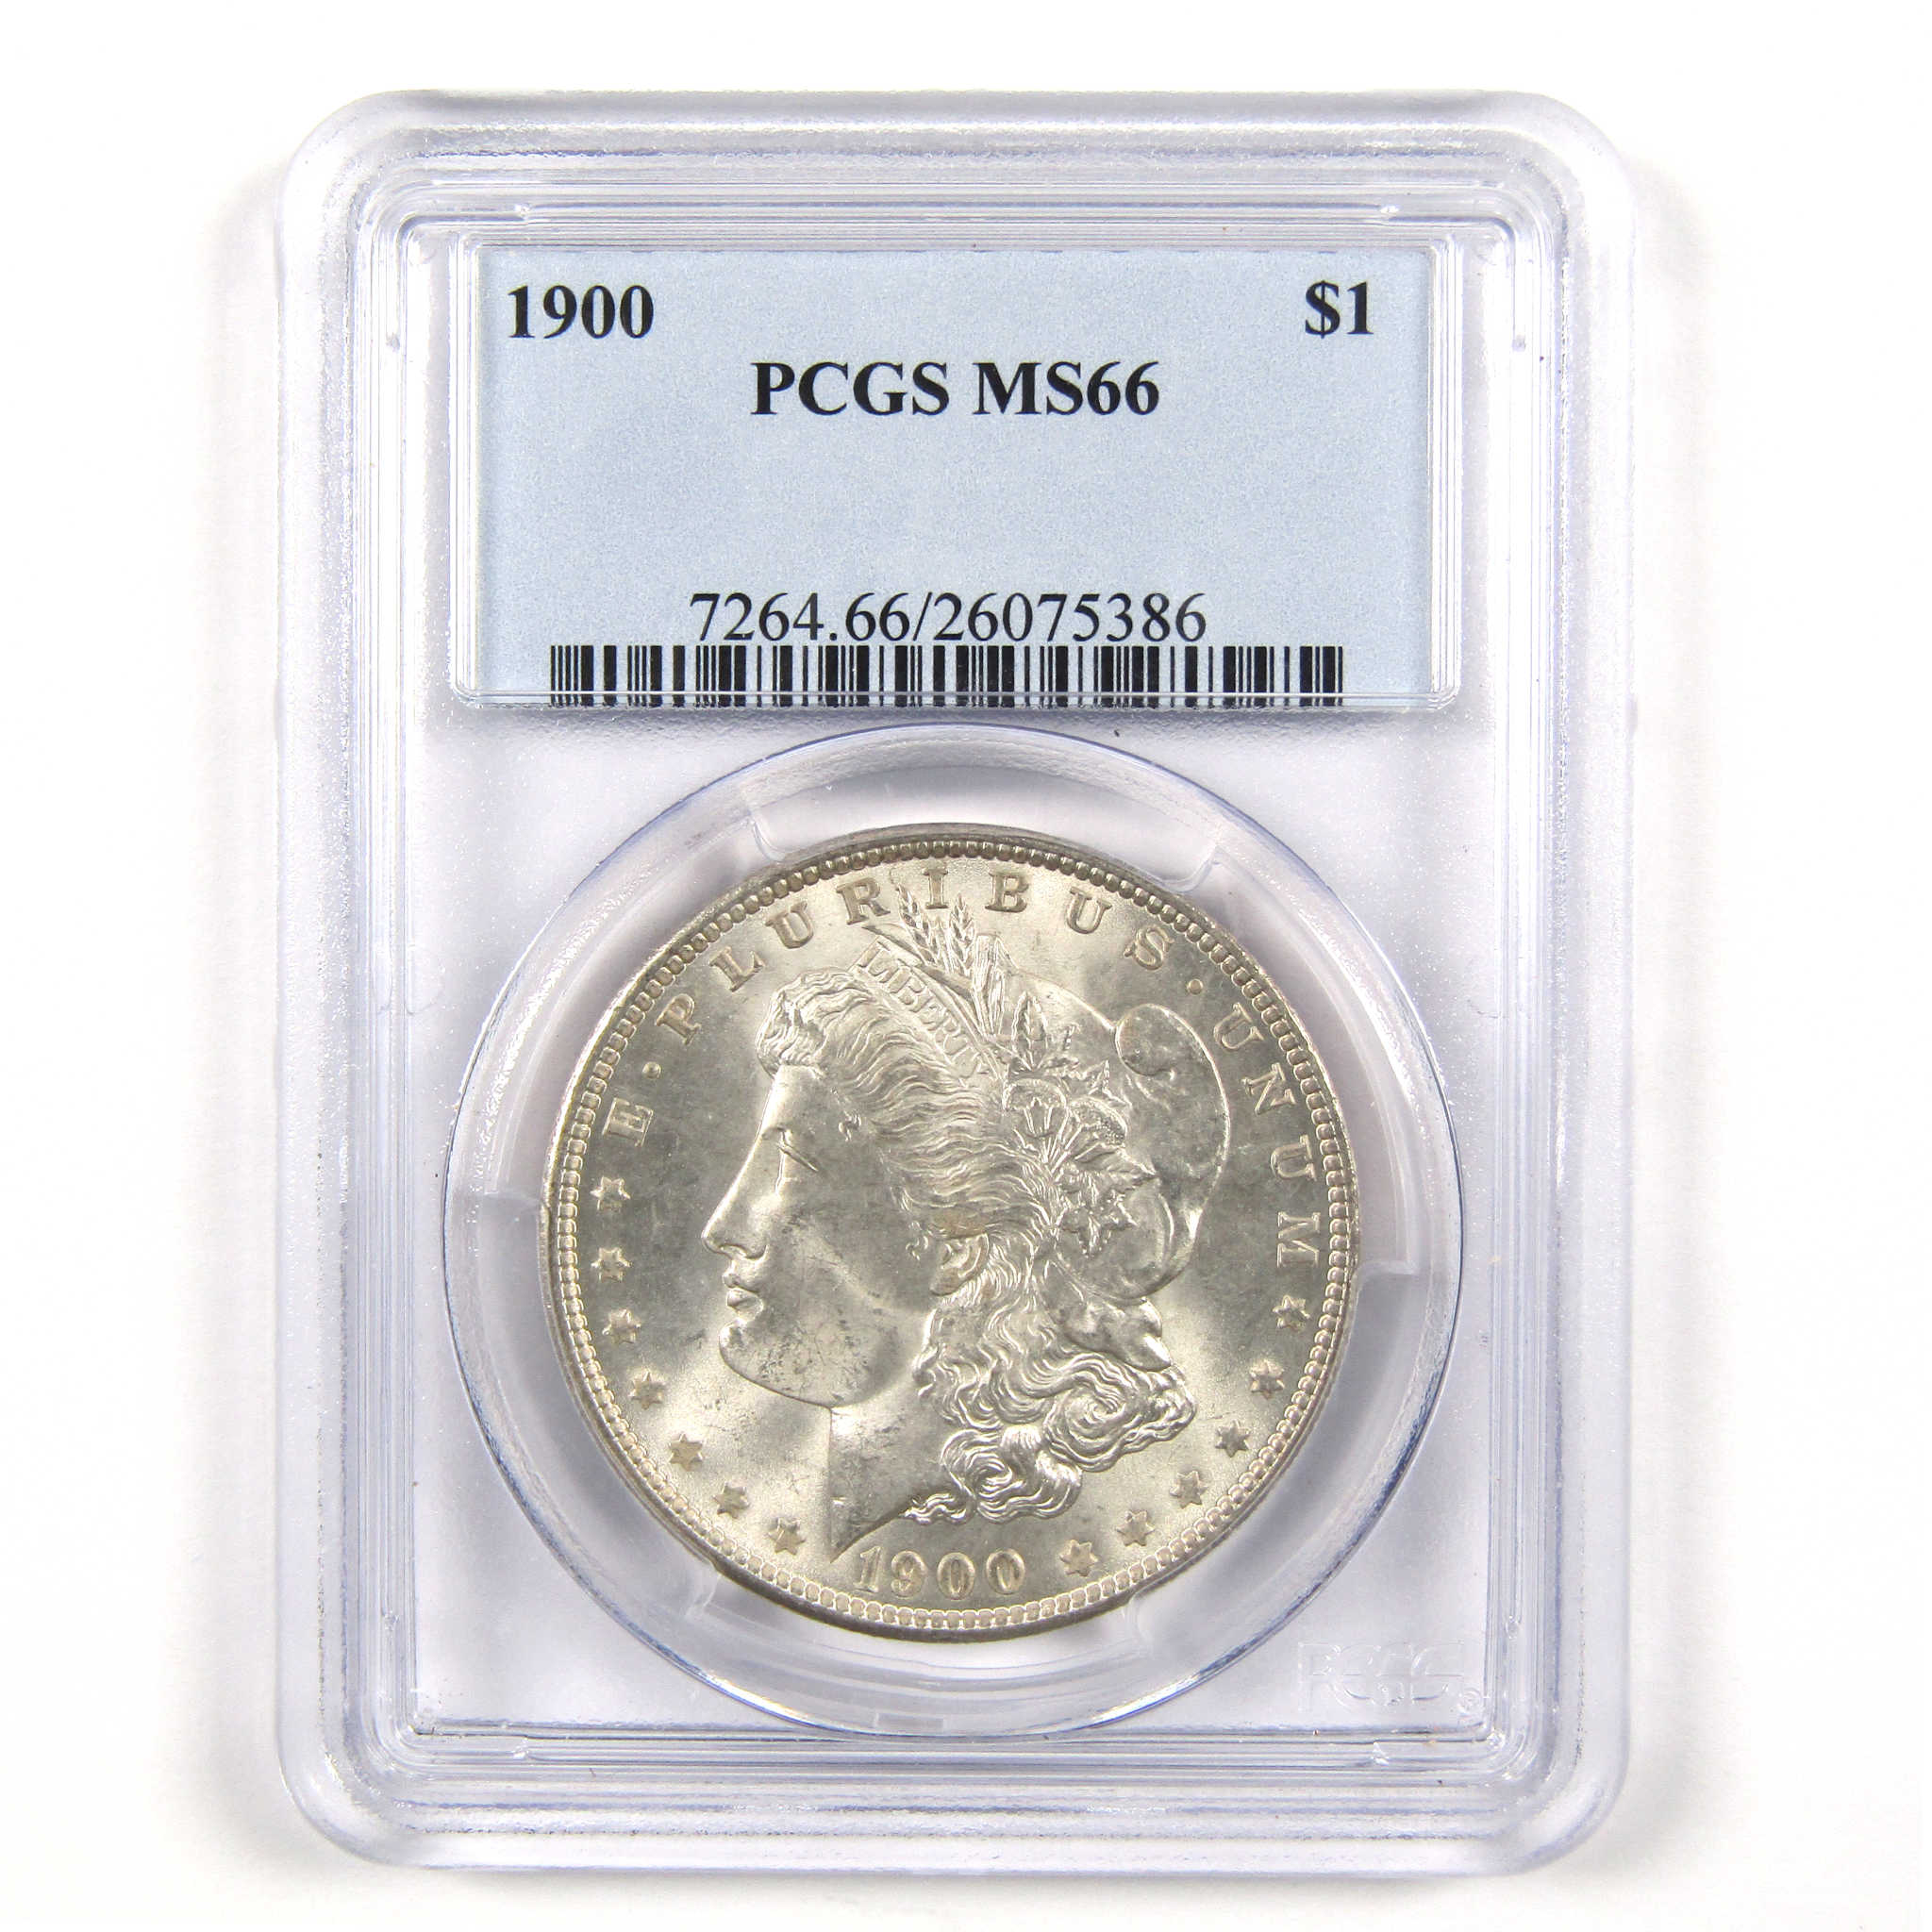 1900 Morgan Dollar MS 66 PCGS Silver $1 Uncirculated Coin SKU:I11731 - Morgan coin - Morgan silver dollar - Morgan silver dollar for sale - Profile Coins &amp; Collectibles